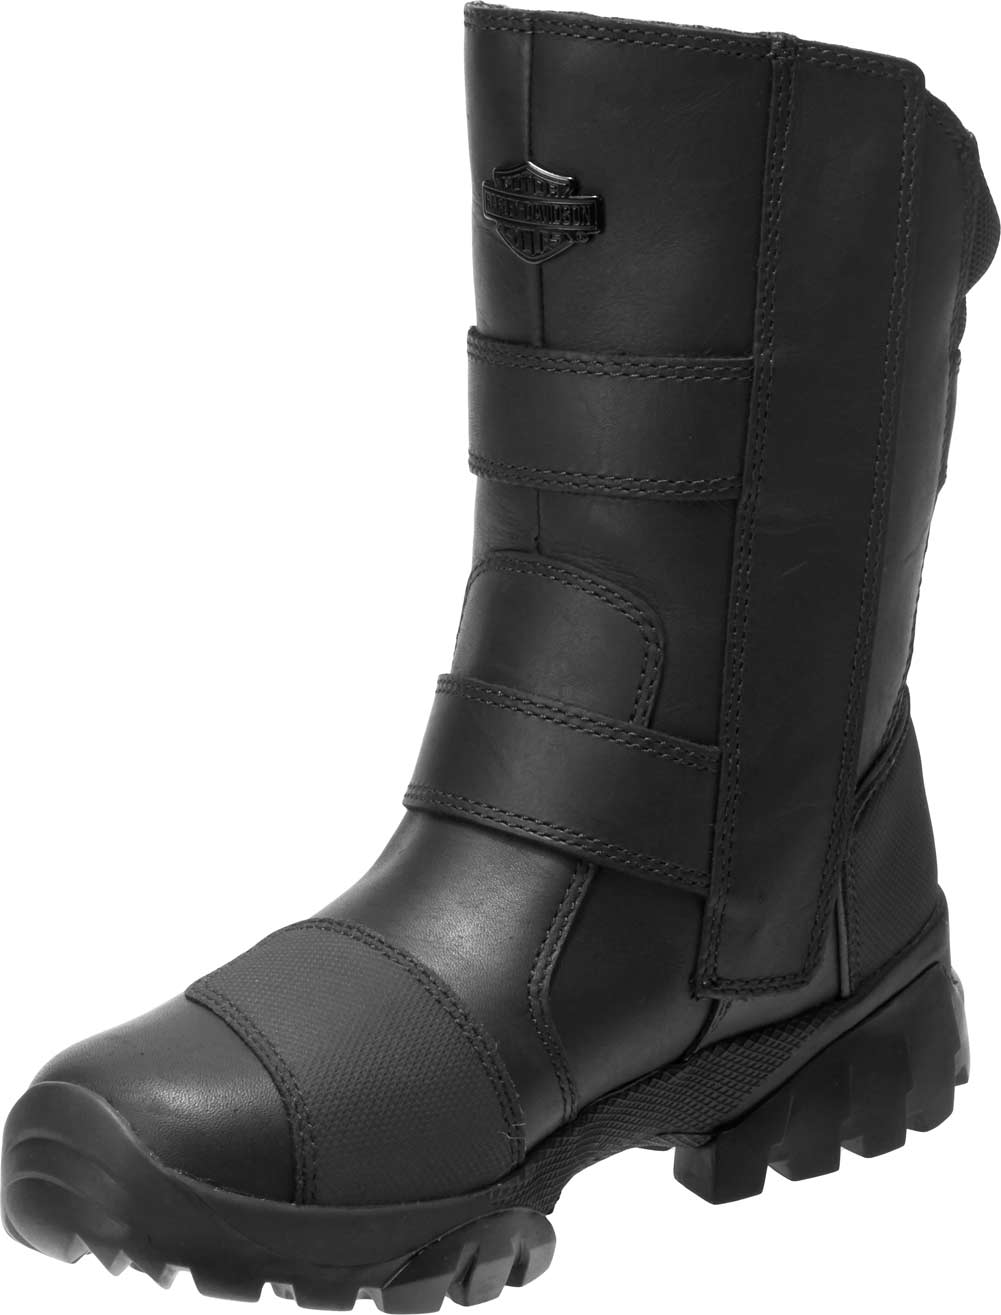 waterproof motorcycle riding boots